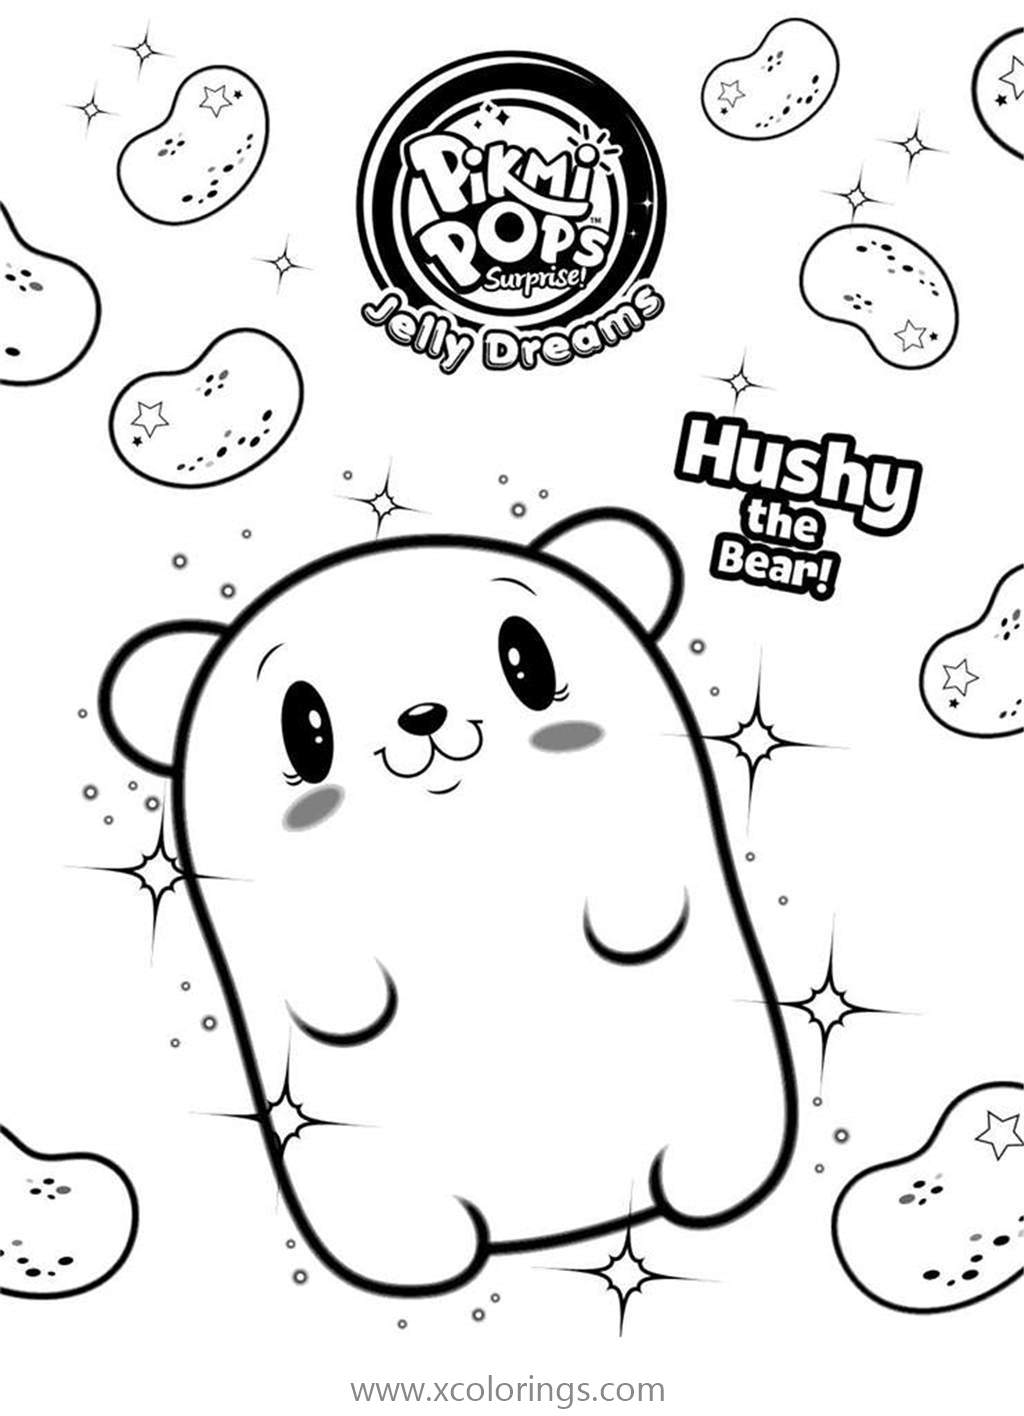 Free Pikmi Pops Coloring Pages Jelly Bear Hushy printable